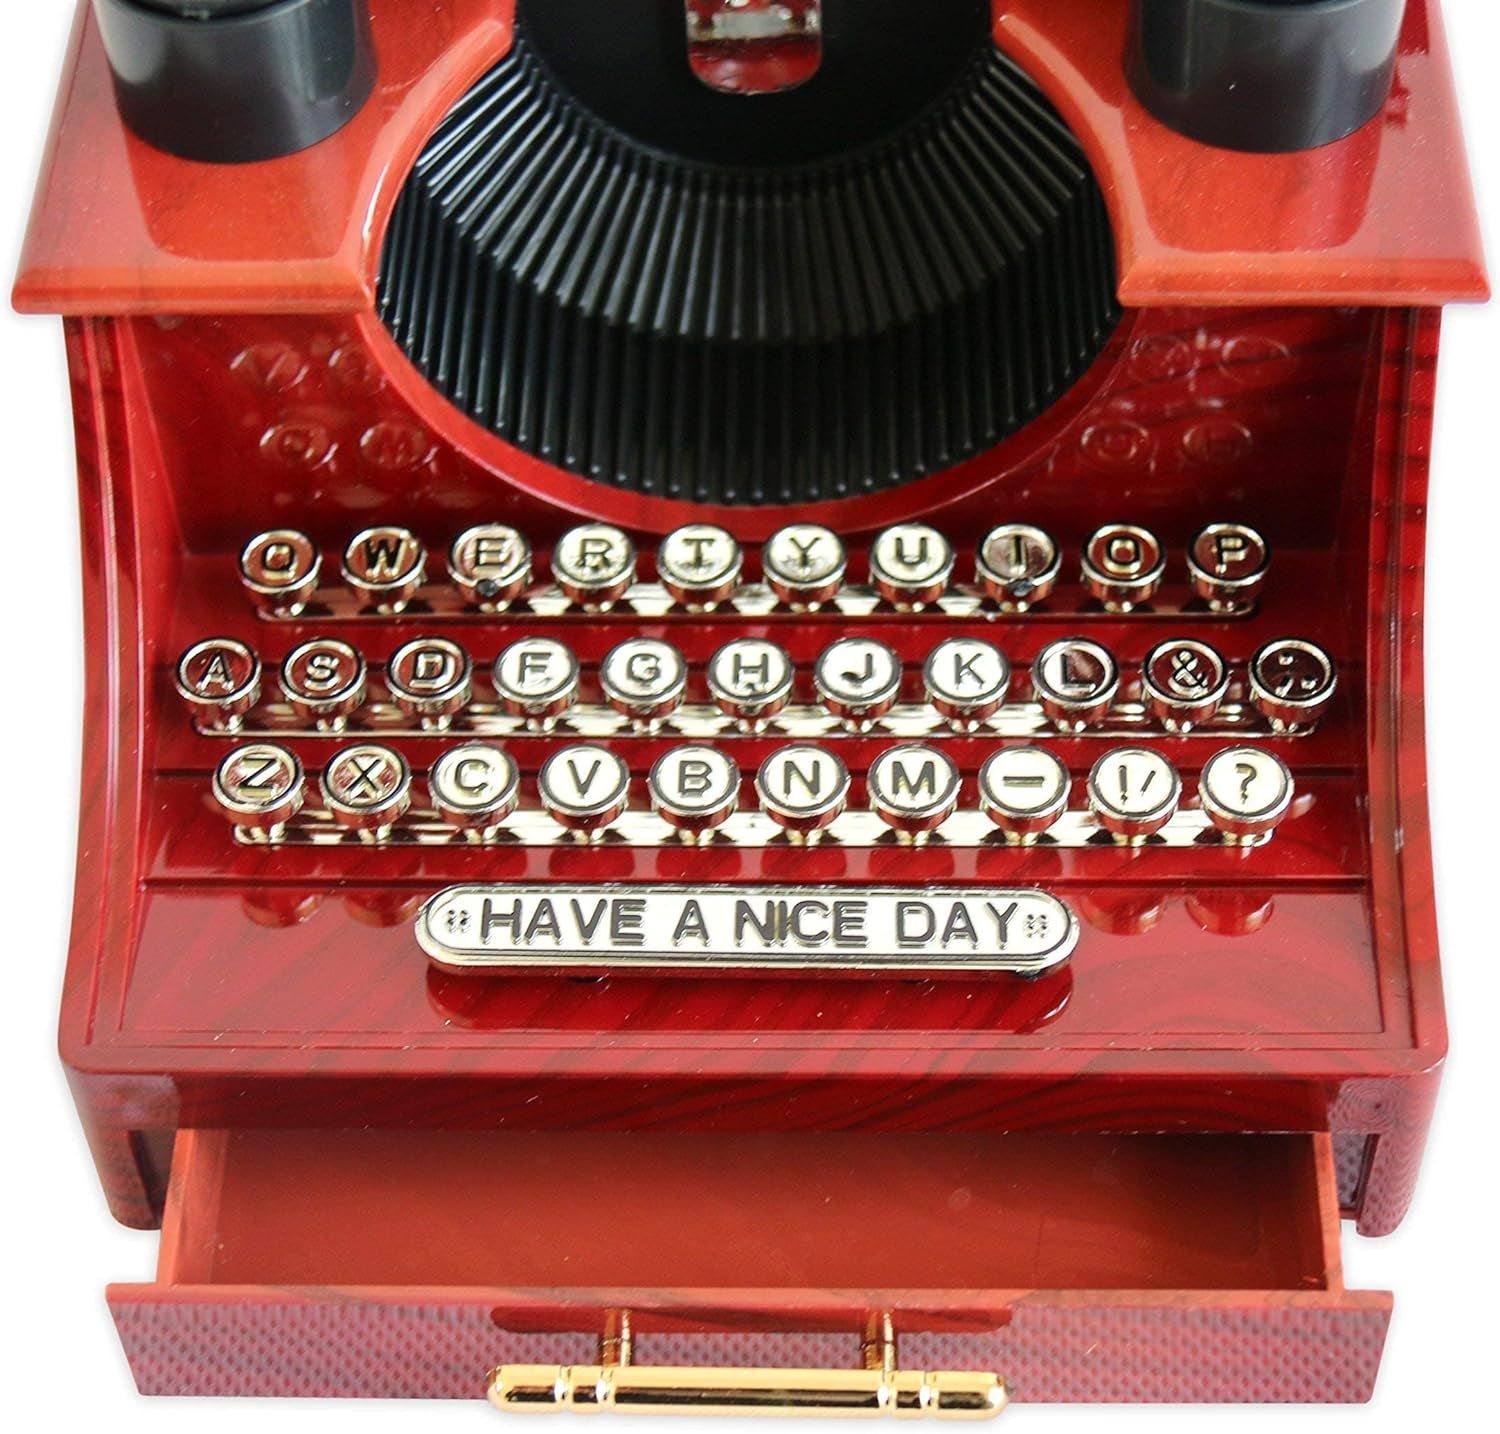 Vintage Typewriter Music Box for Home/Office/Study Room Décor Decoration